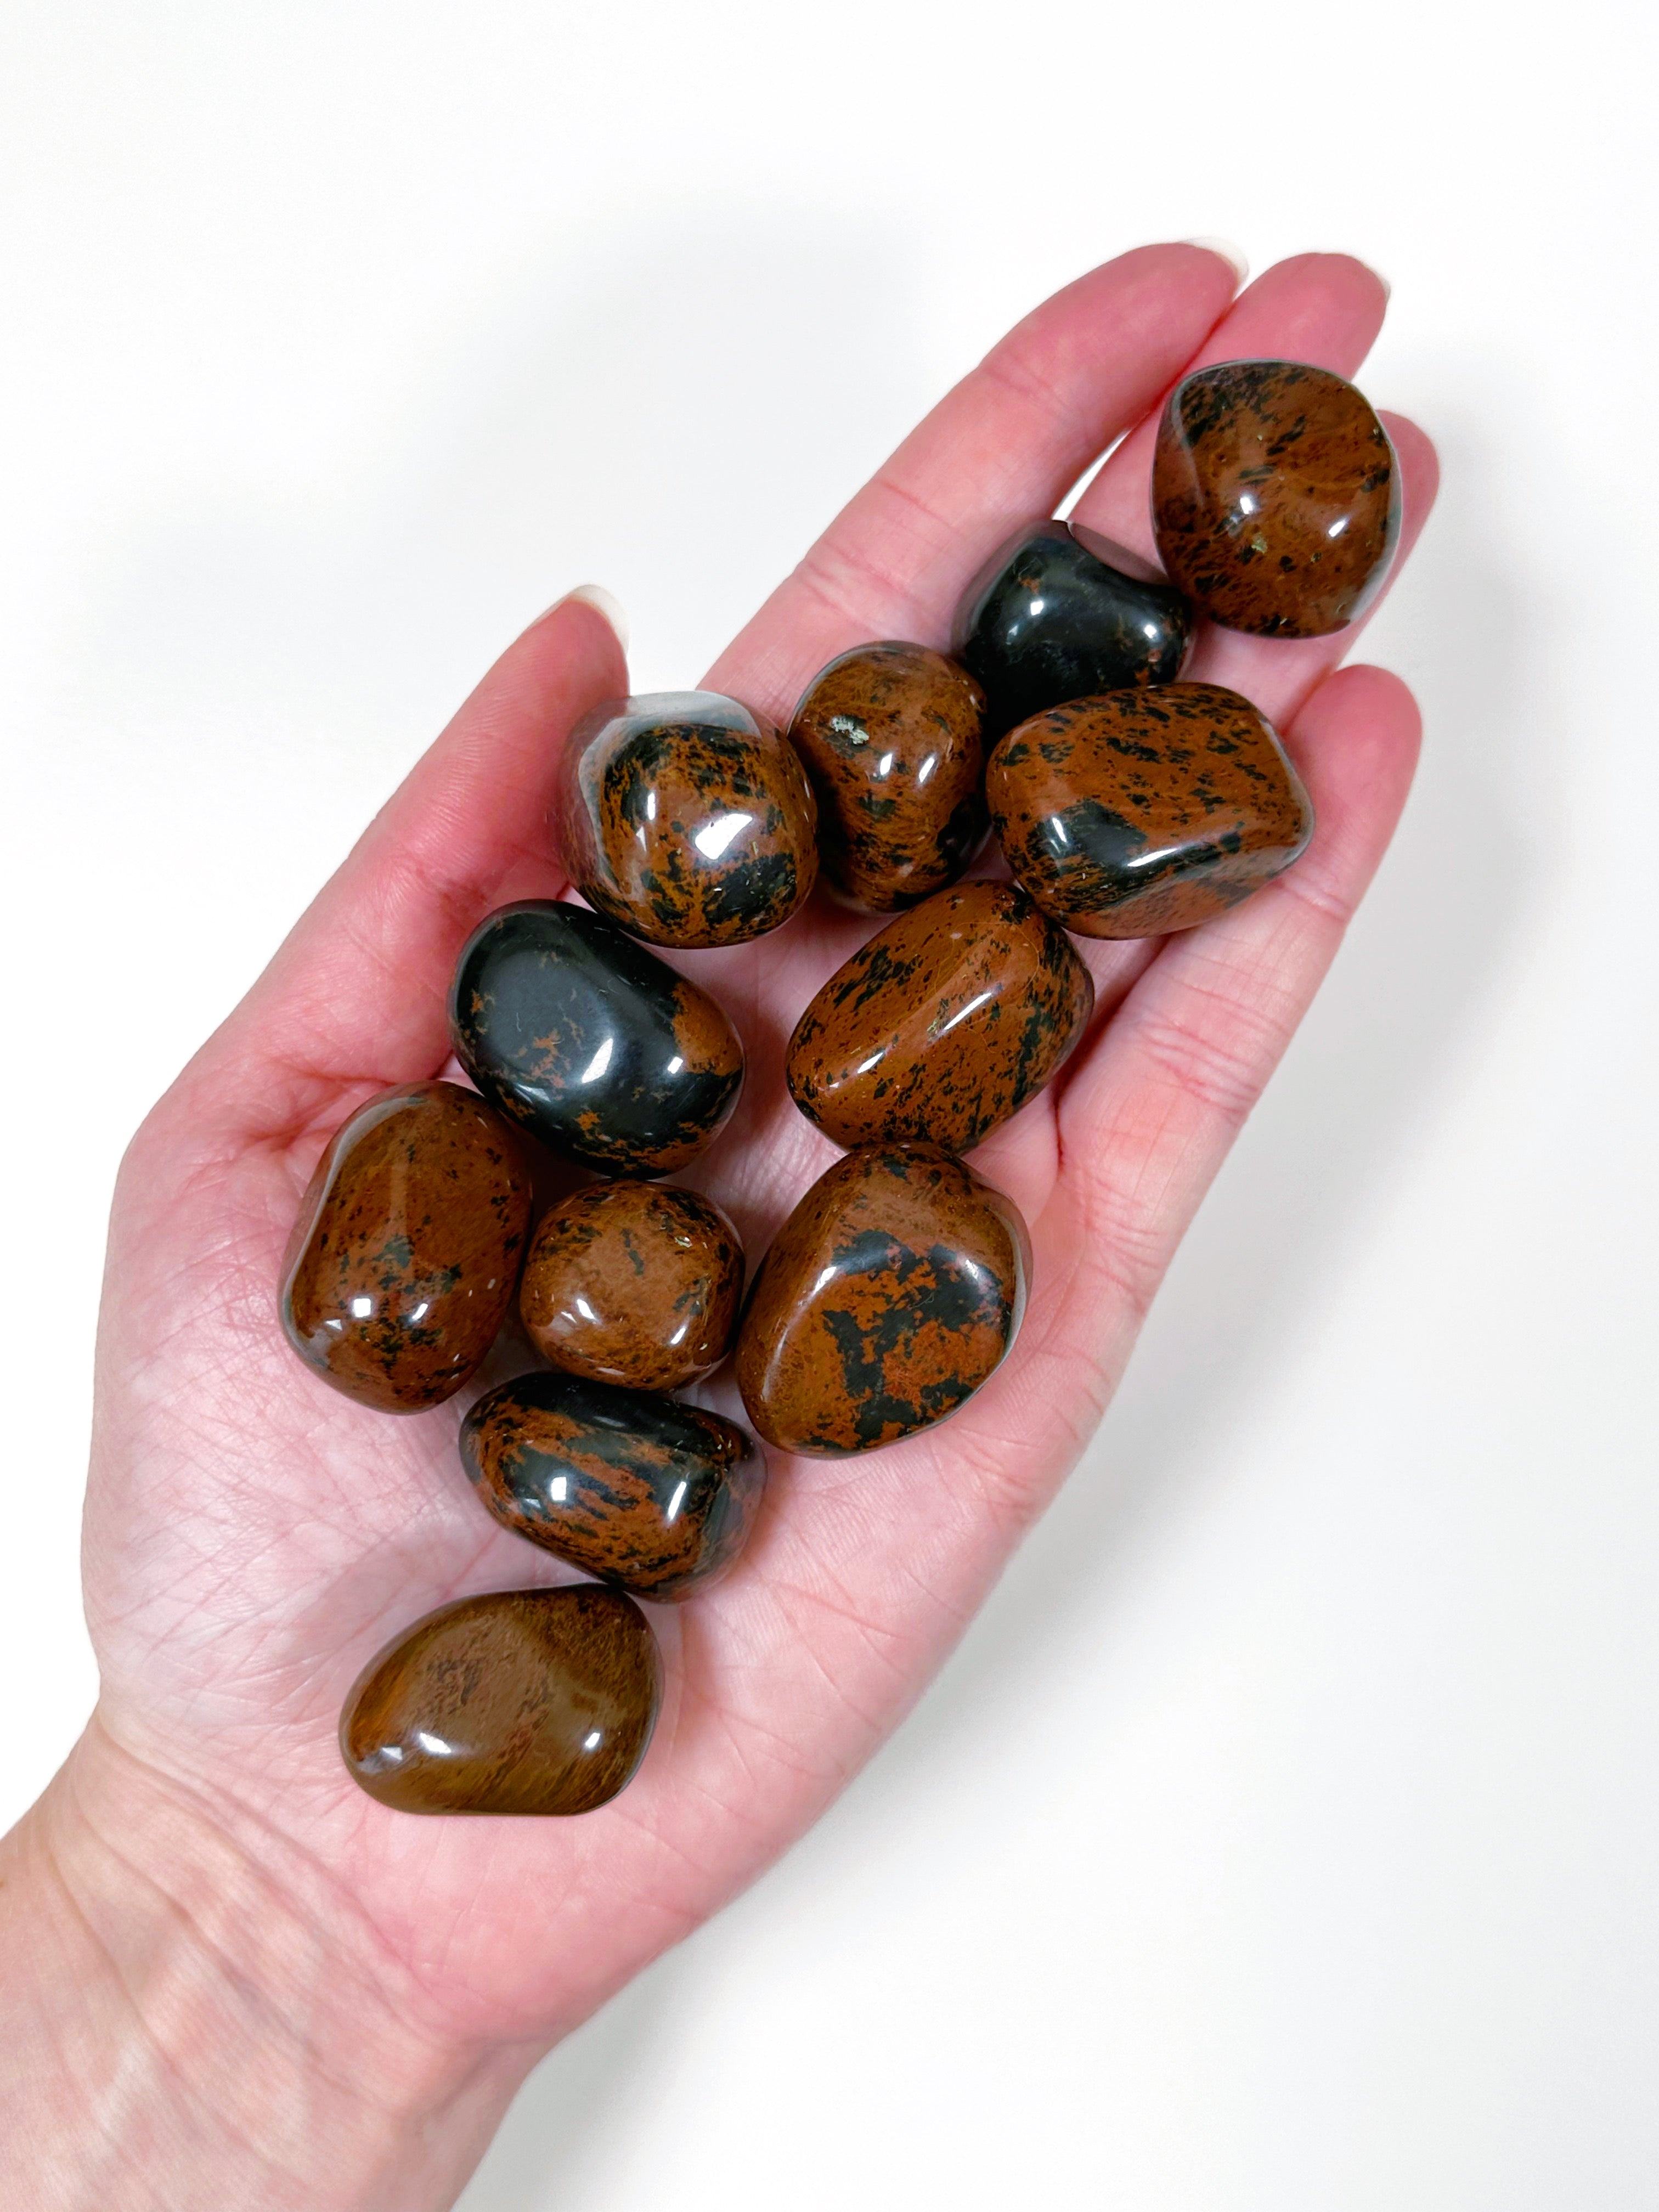 MAHOGANY OBSIDIAN CHONK - 33 bday, chonk, end of year sale, holiday sale, mahogany obsidian, pocket crystal, pocket stone, protection gift bundle, recently added, tumble, tumbled, tumbled stone - The Mineral Maven